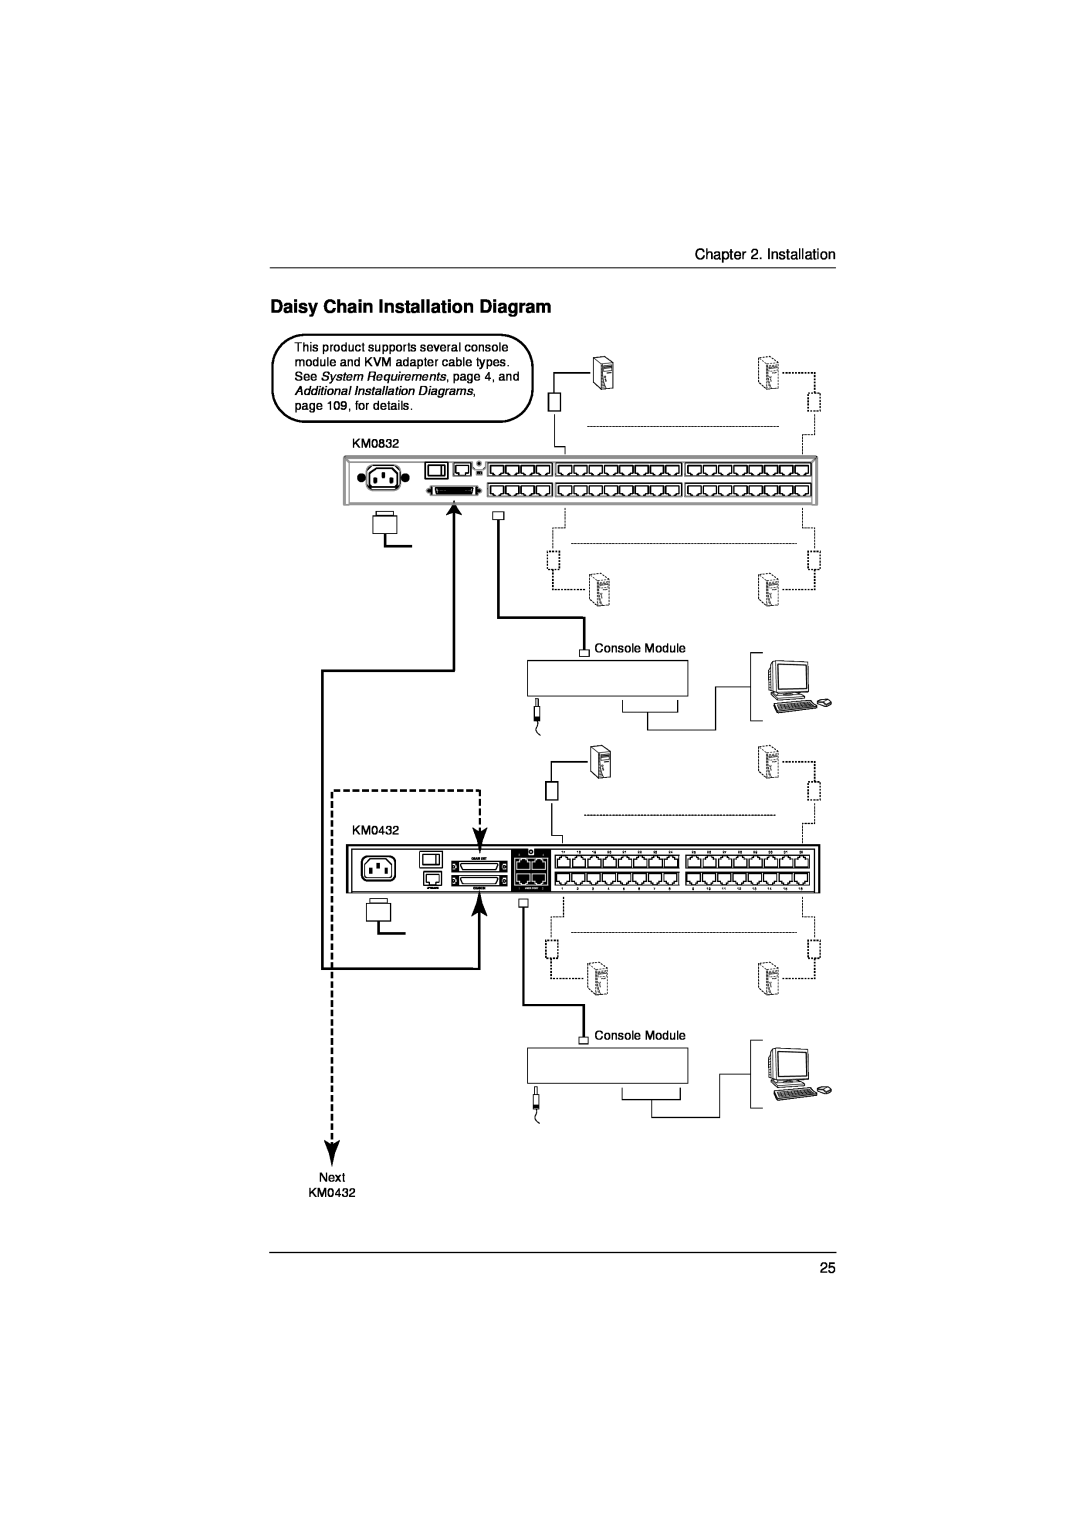 ATEN Technology user manual Daisy Chain Installation Diagram, page 109, for details KM0832 Console Module KM0432 